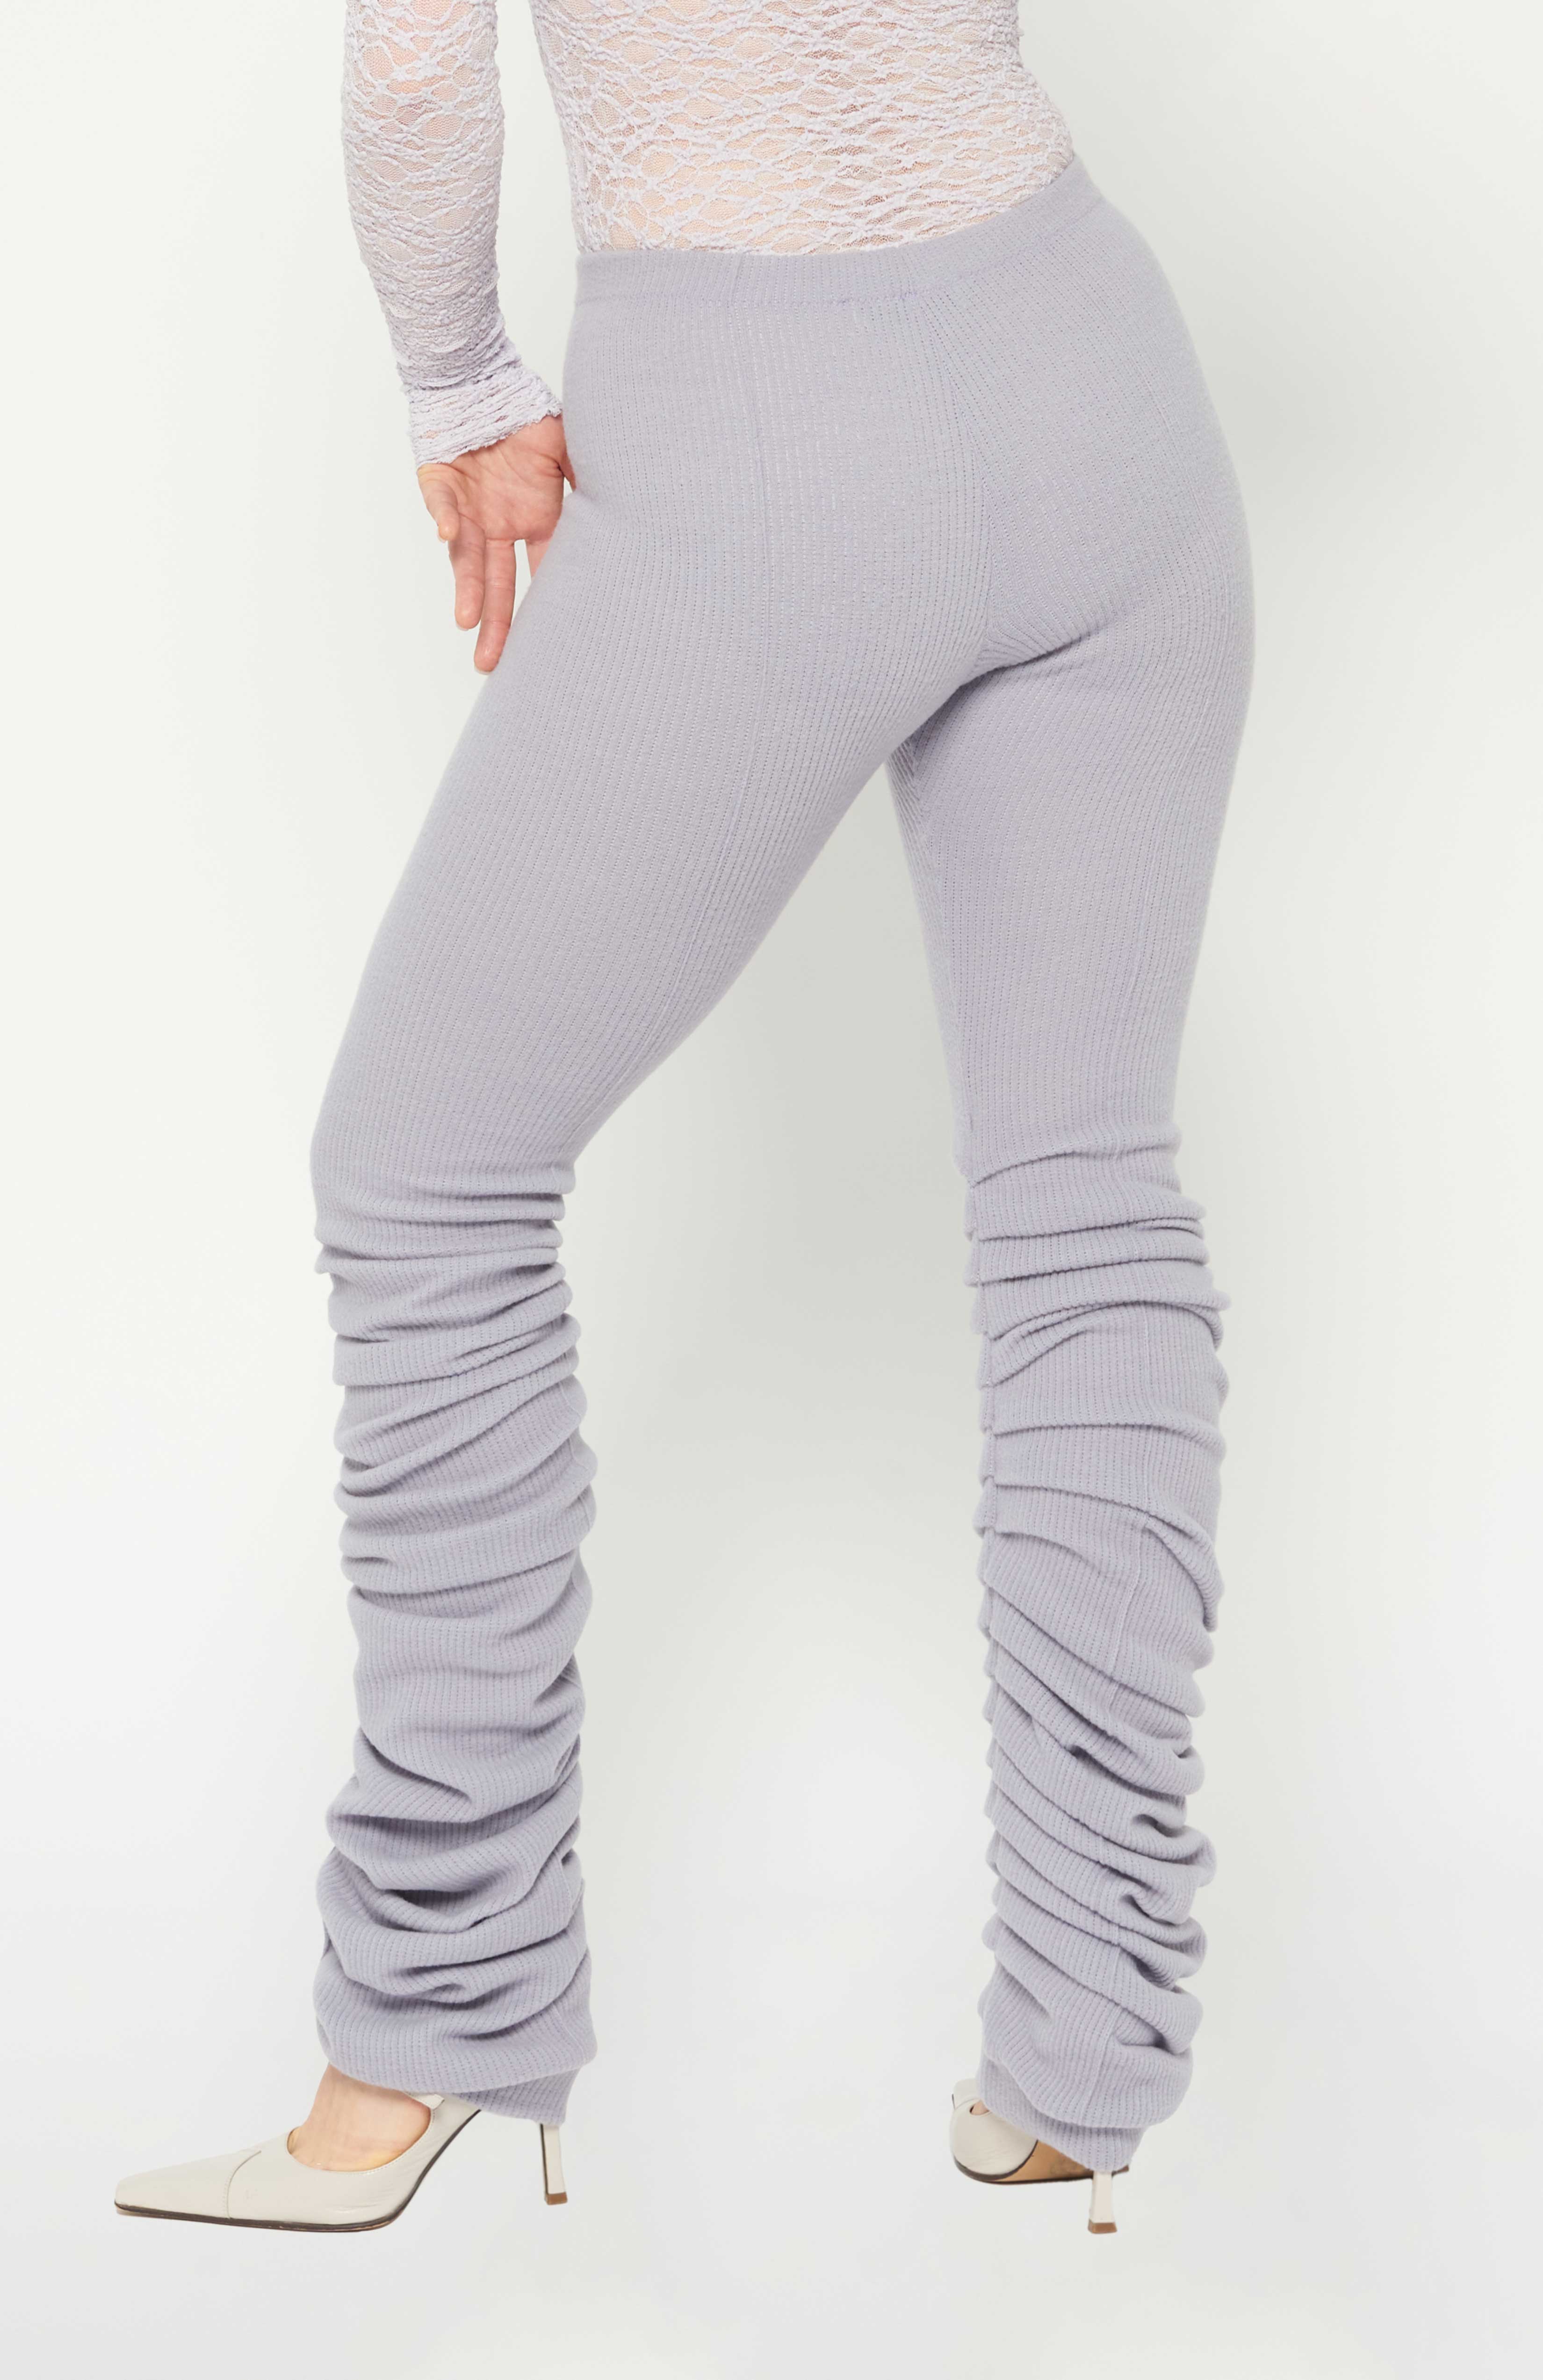 Maroske Peech High-rise wool-blend warm-up lilac leggings. Pleated inseam starts from the knee for a lamb leg effect. Flattering pin tucks run along the back and front of both legs giving you visual cues to correct your lines in the mirror.